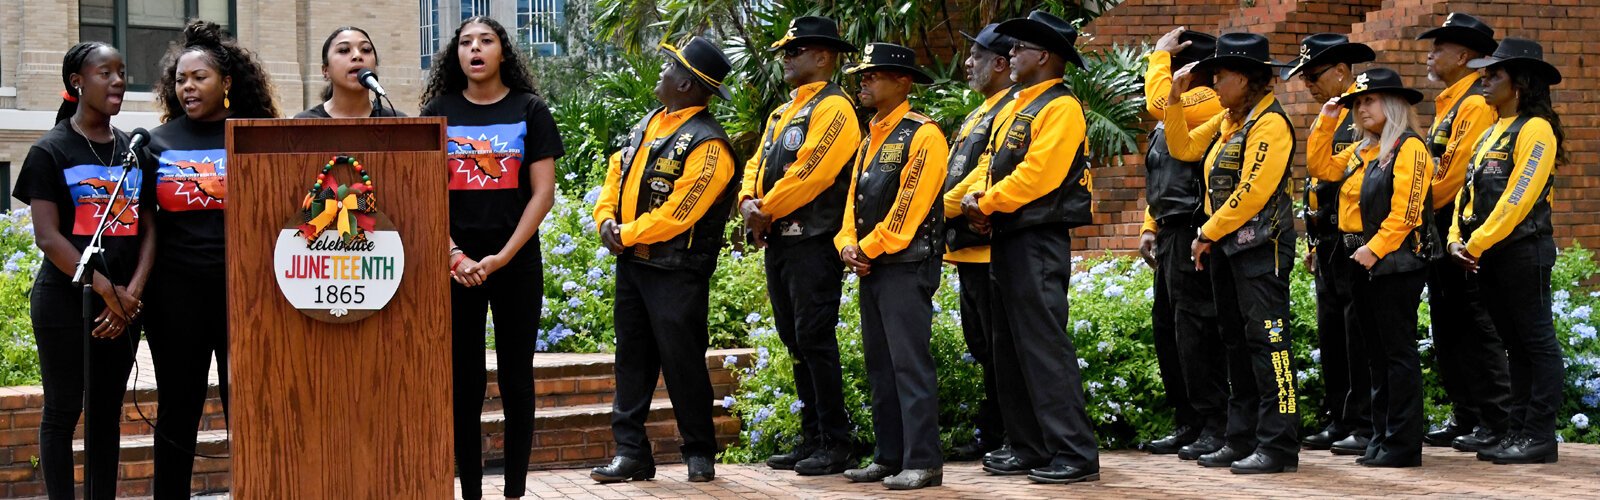 The Buffalo Soldiers, a U.S. Army regiment made up primarily of African-Americans that served on the Western frontier after the Civil War, are represented in the Juneteenth flag-raising ceremony at Old City Hall in Tampa.